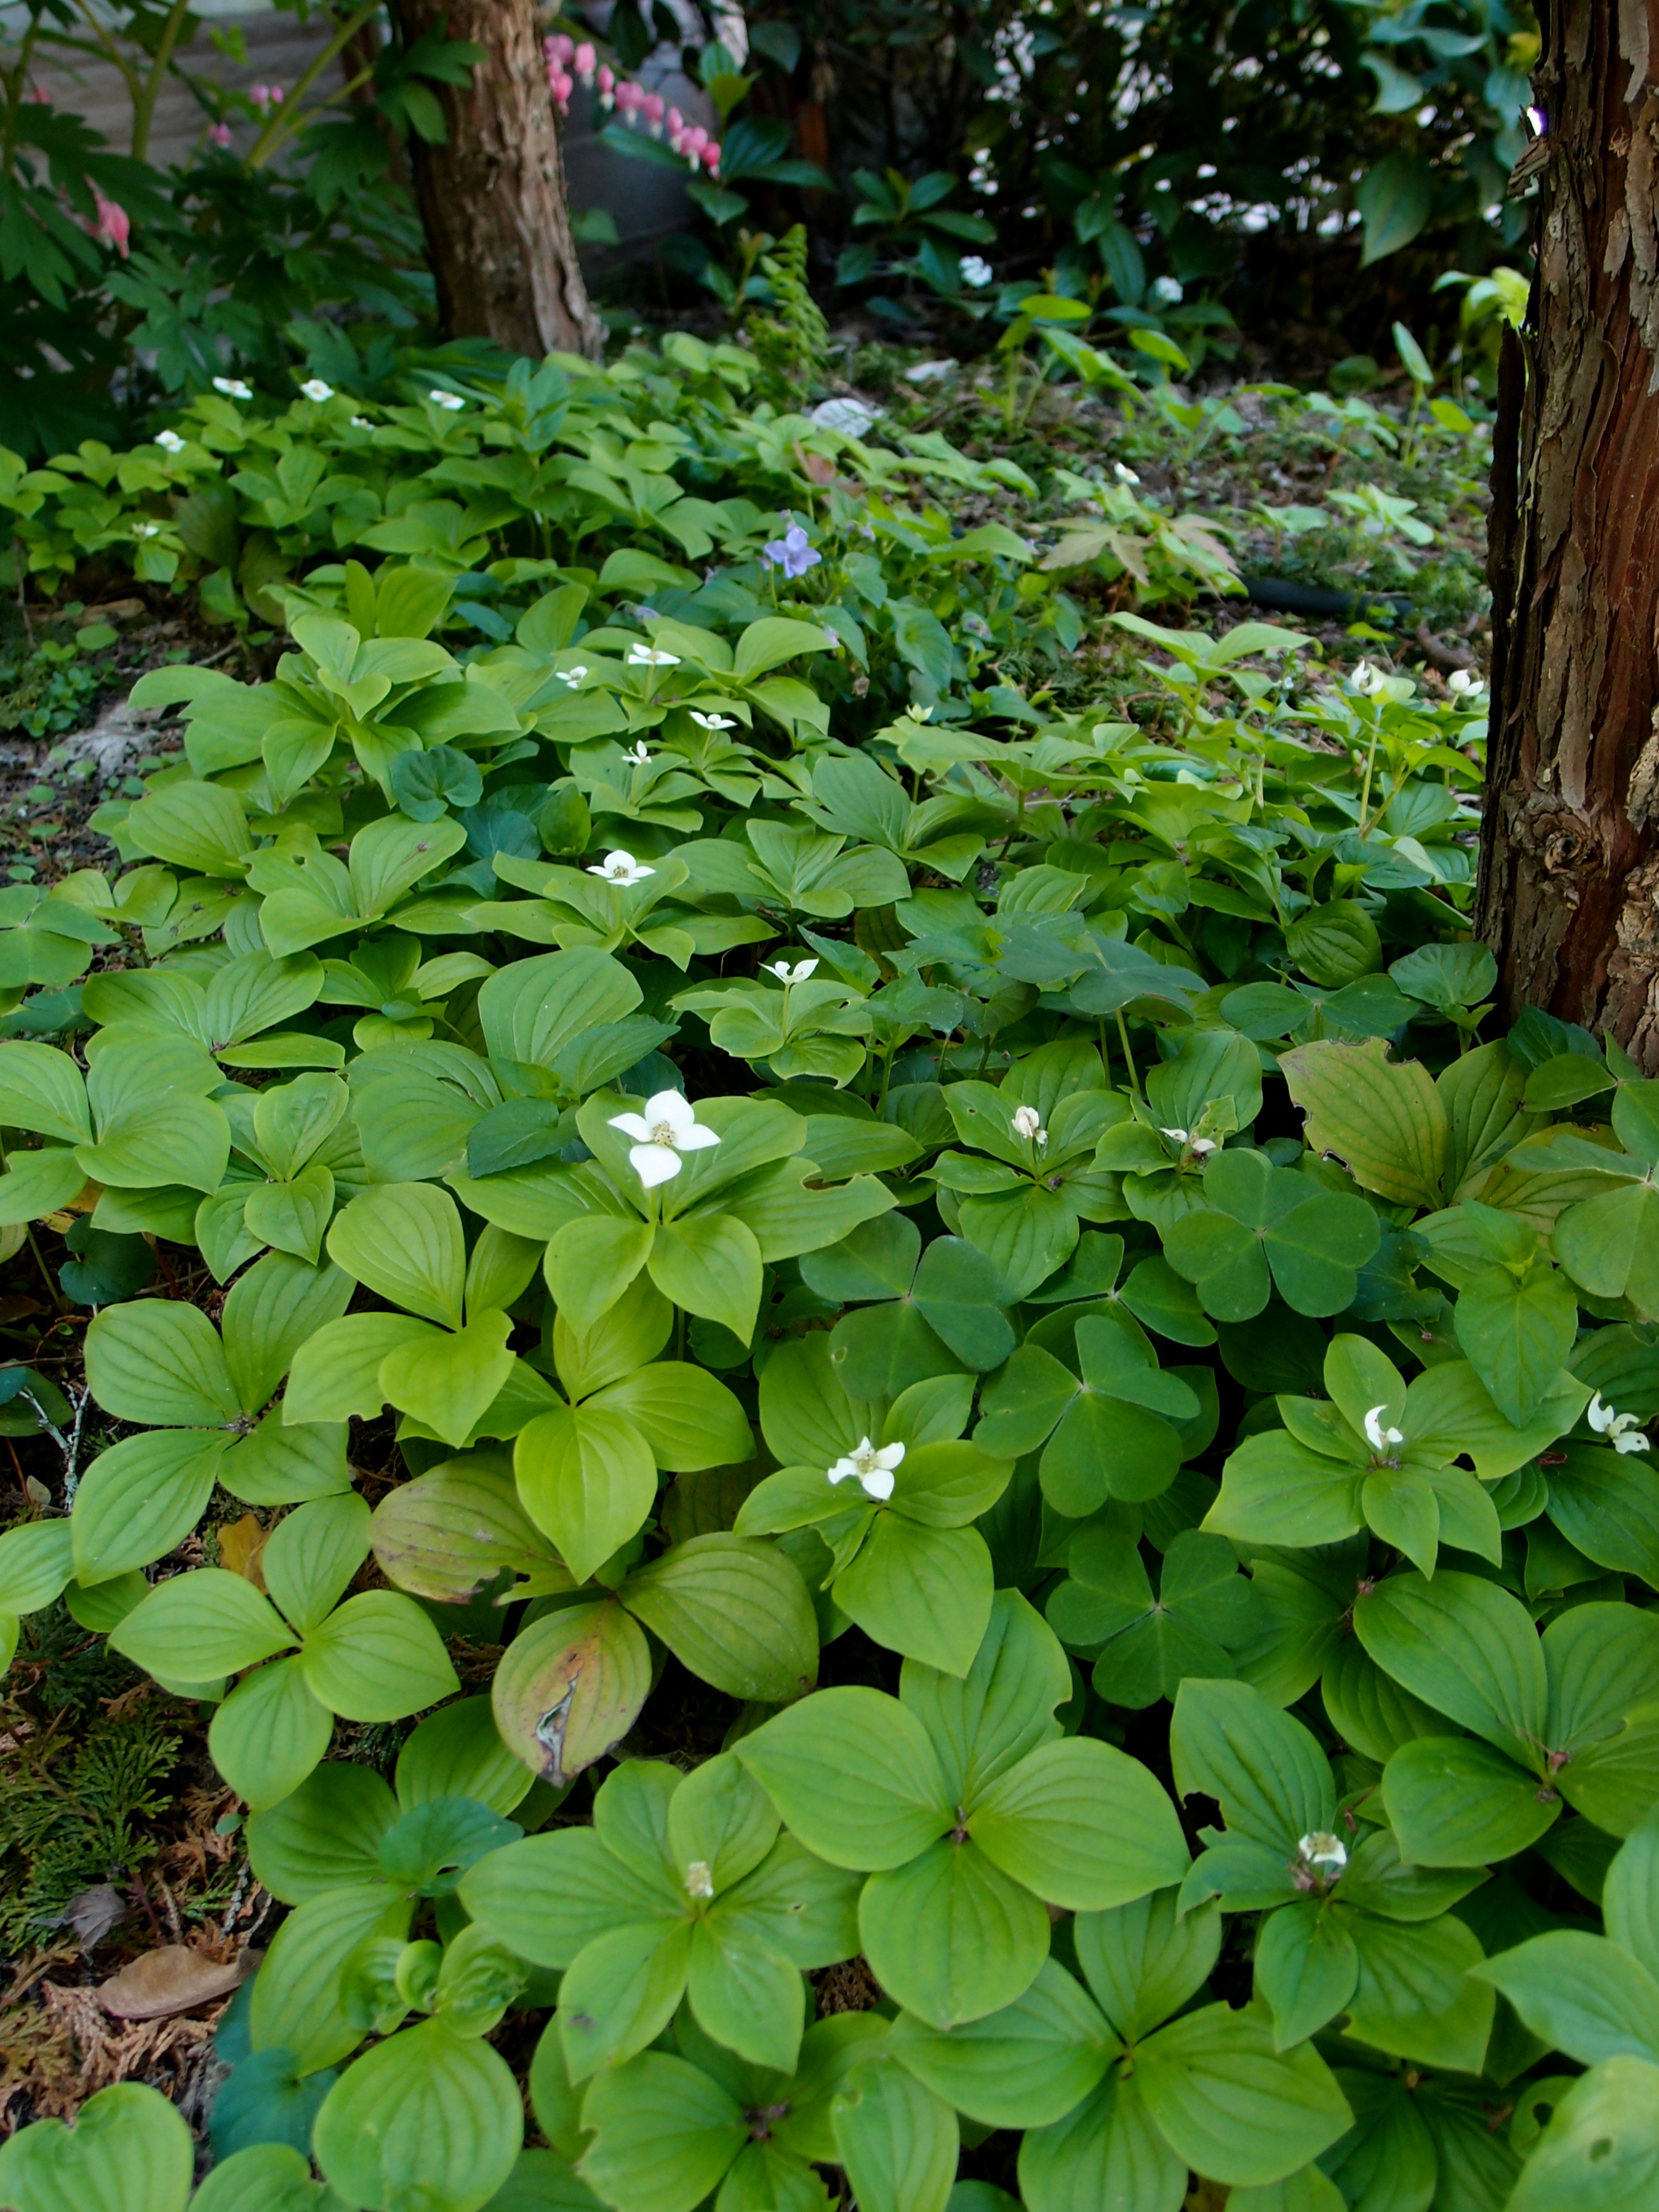 A group of green plants with white flowers in the ground.